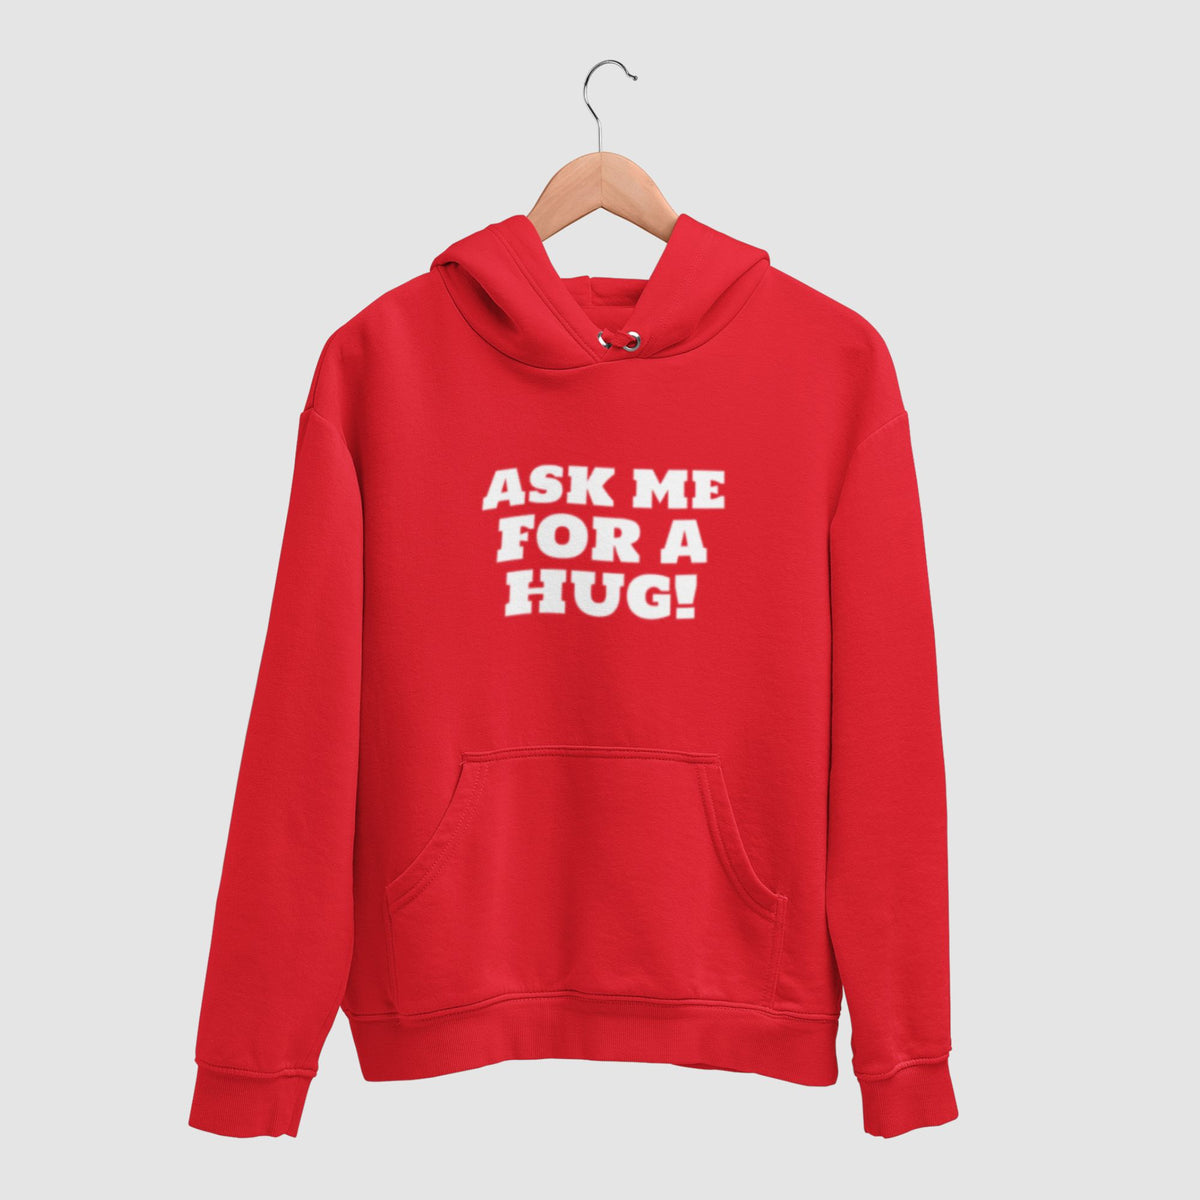 ask-me-for-a-hug-cotton-printed-unisex-red-hoodie-for-men-for-women-gogirgit-com  #color_red